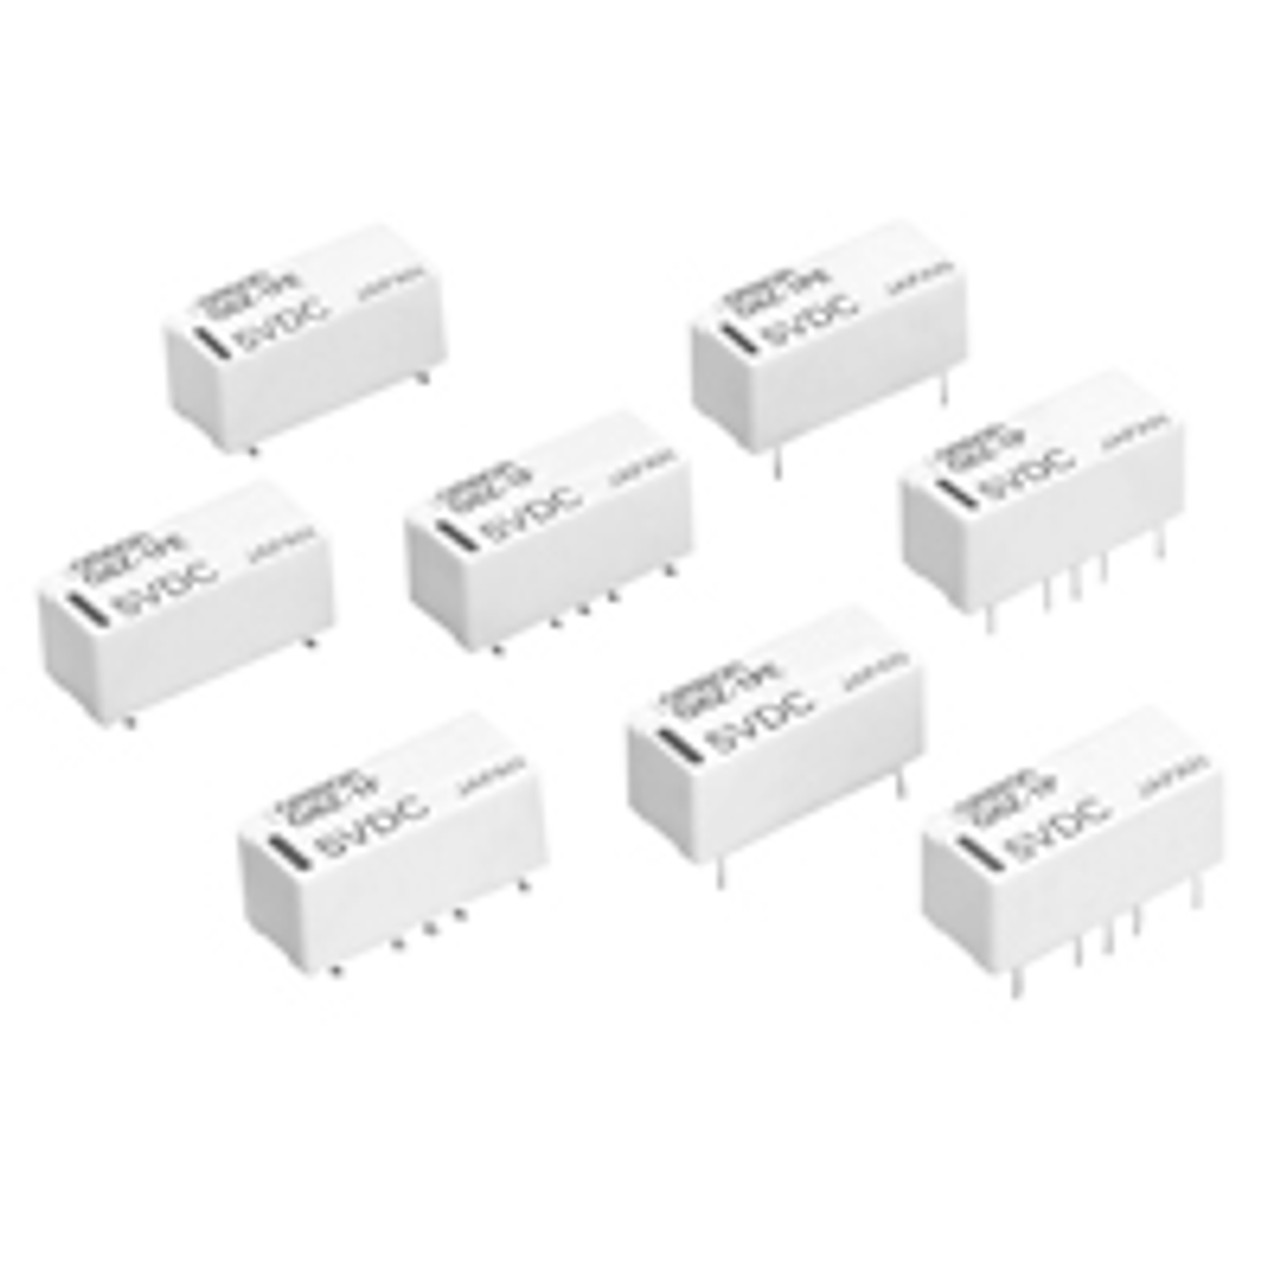 Omron G6ZK-1FADC4.5 High Frequency Relays